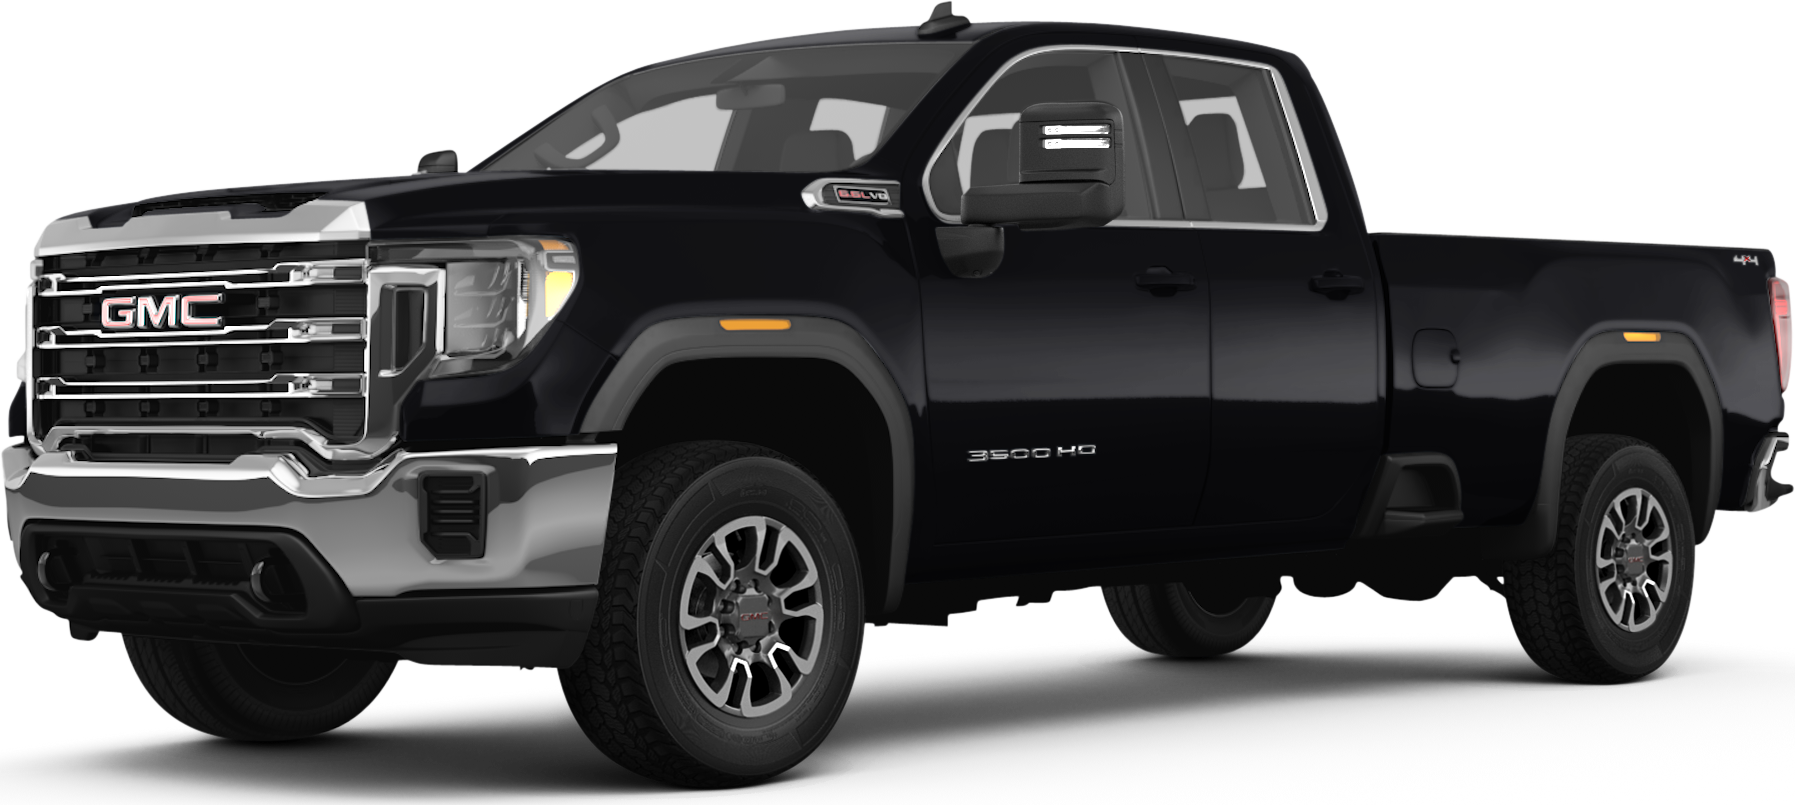 2023 Gmc Sierra 3500 Hd Double Cab Price Reviews Pictures And More